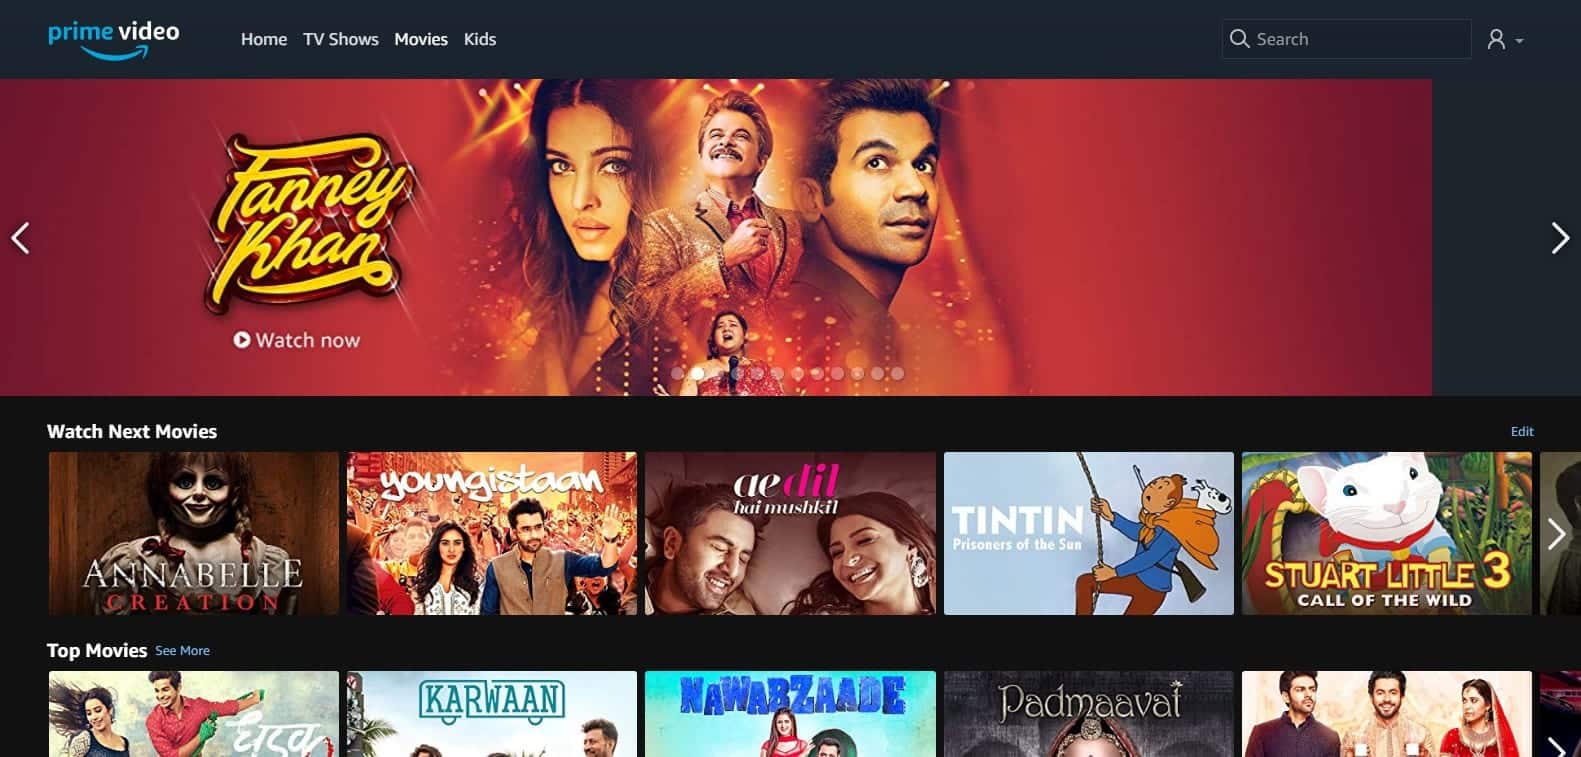 Top 6 Sites to Watch Hindi Movies Online for Free - MiniTool